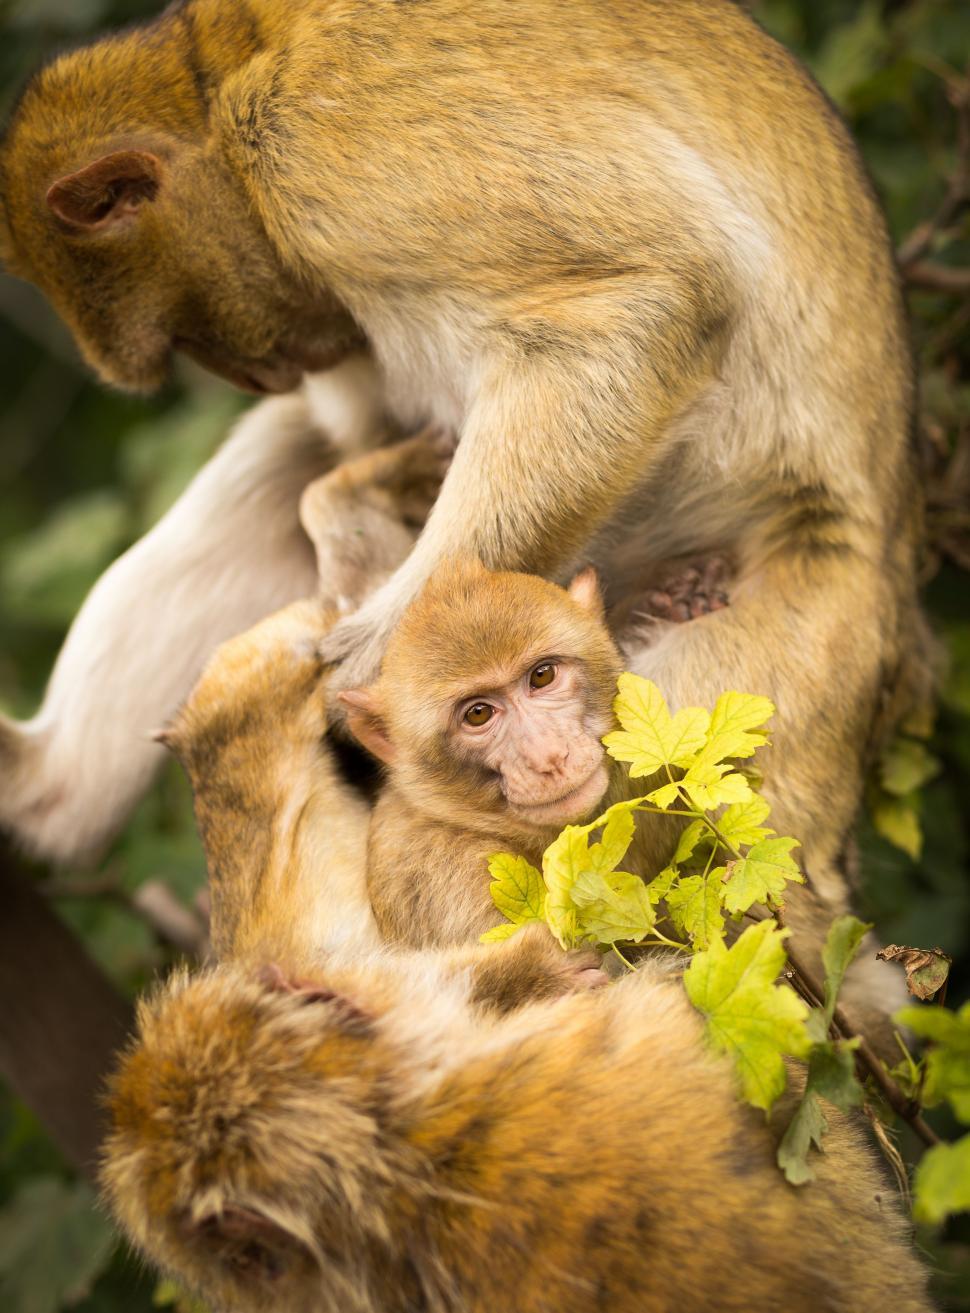 Free Image of Monkey Sitting on Top of Another Monkey in a Tree 